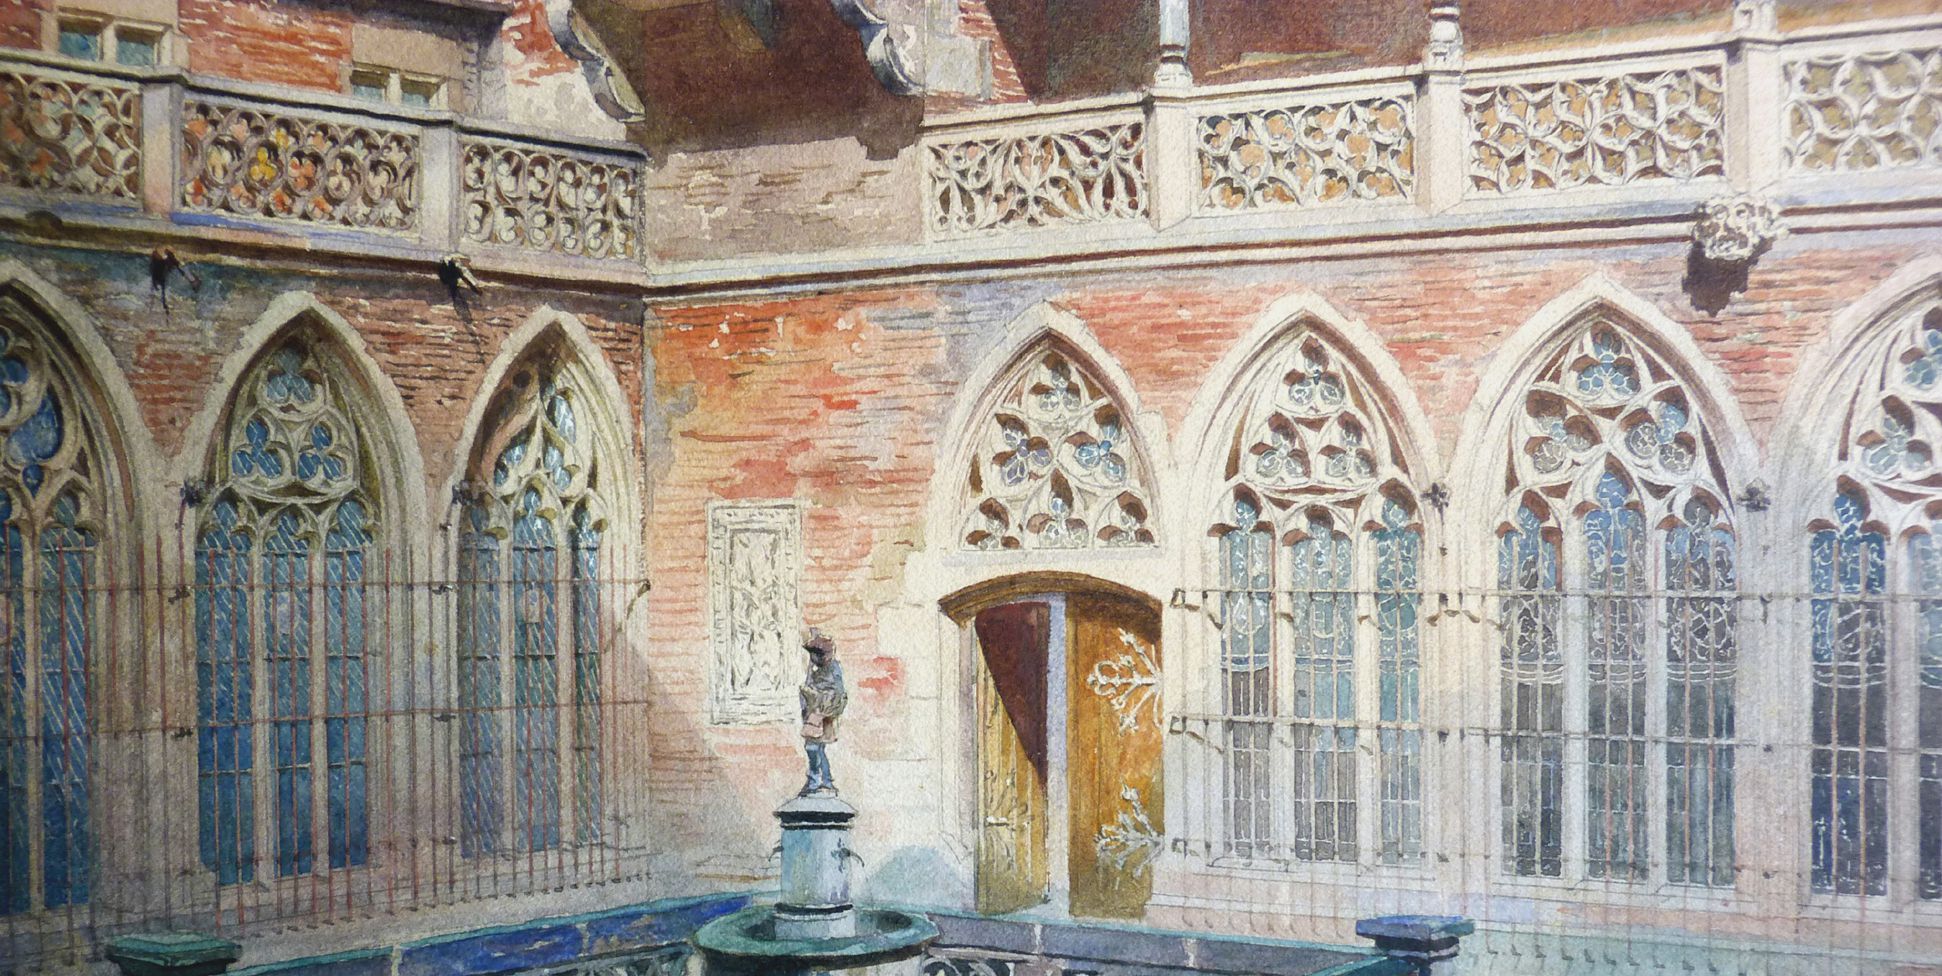 German National Museum, Augustine wing, so-called Wittelsbach Court with Wittelsbach clock Courtyard, detail